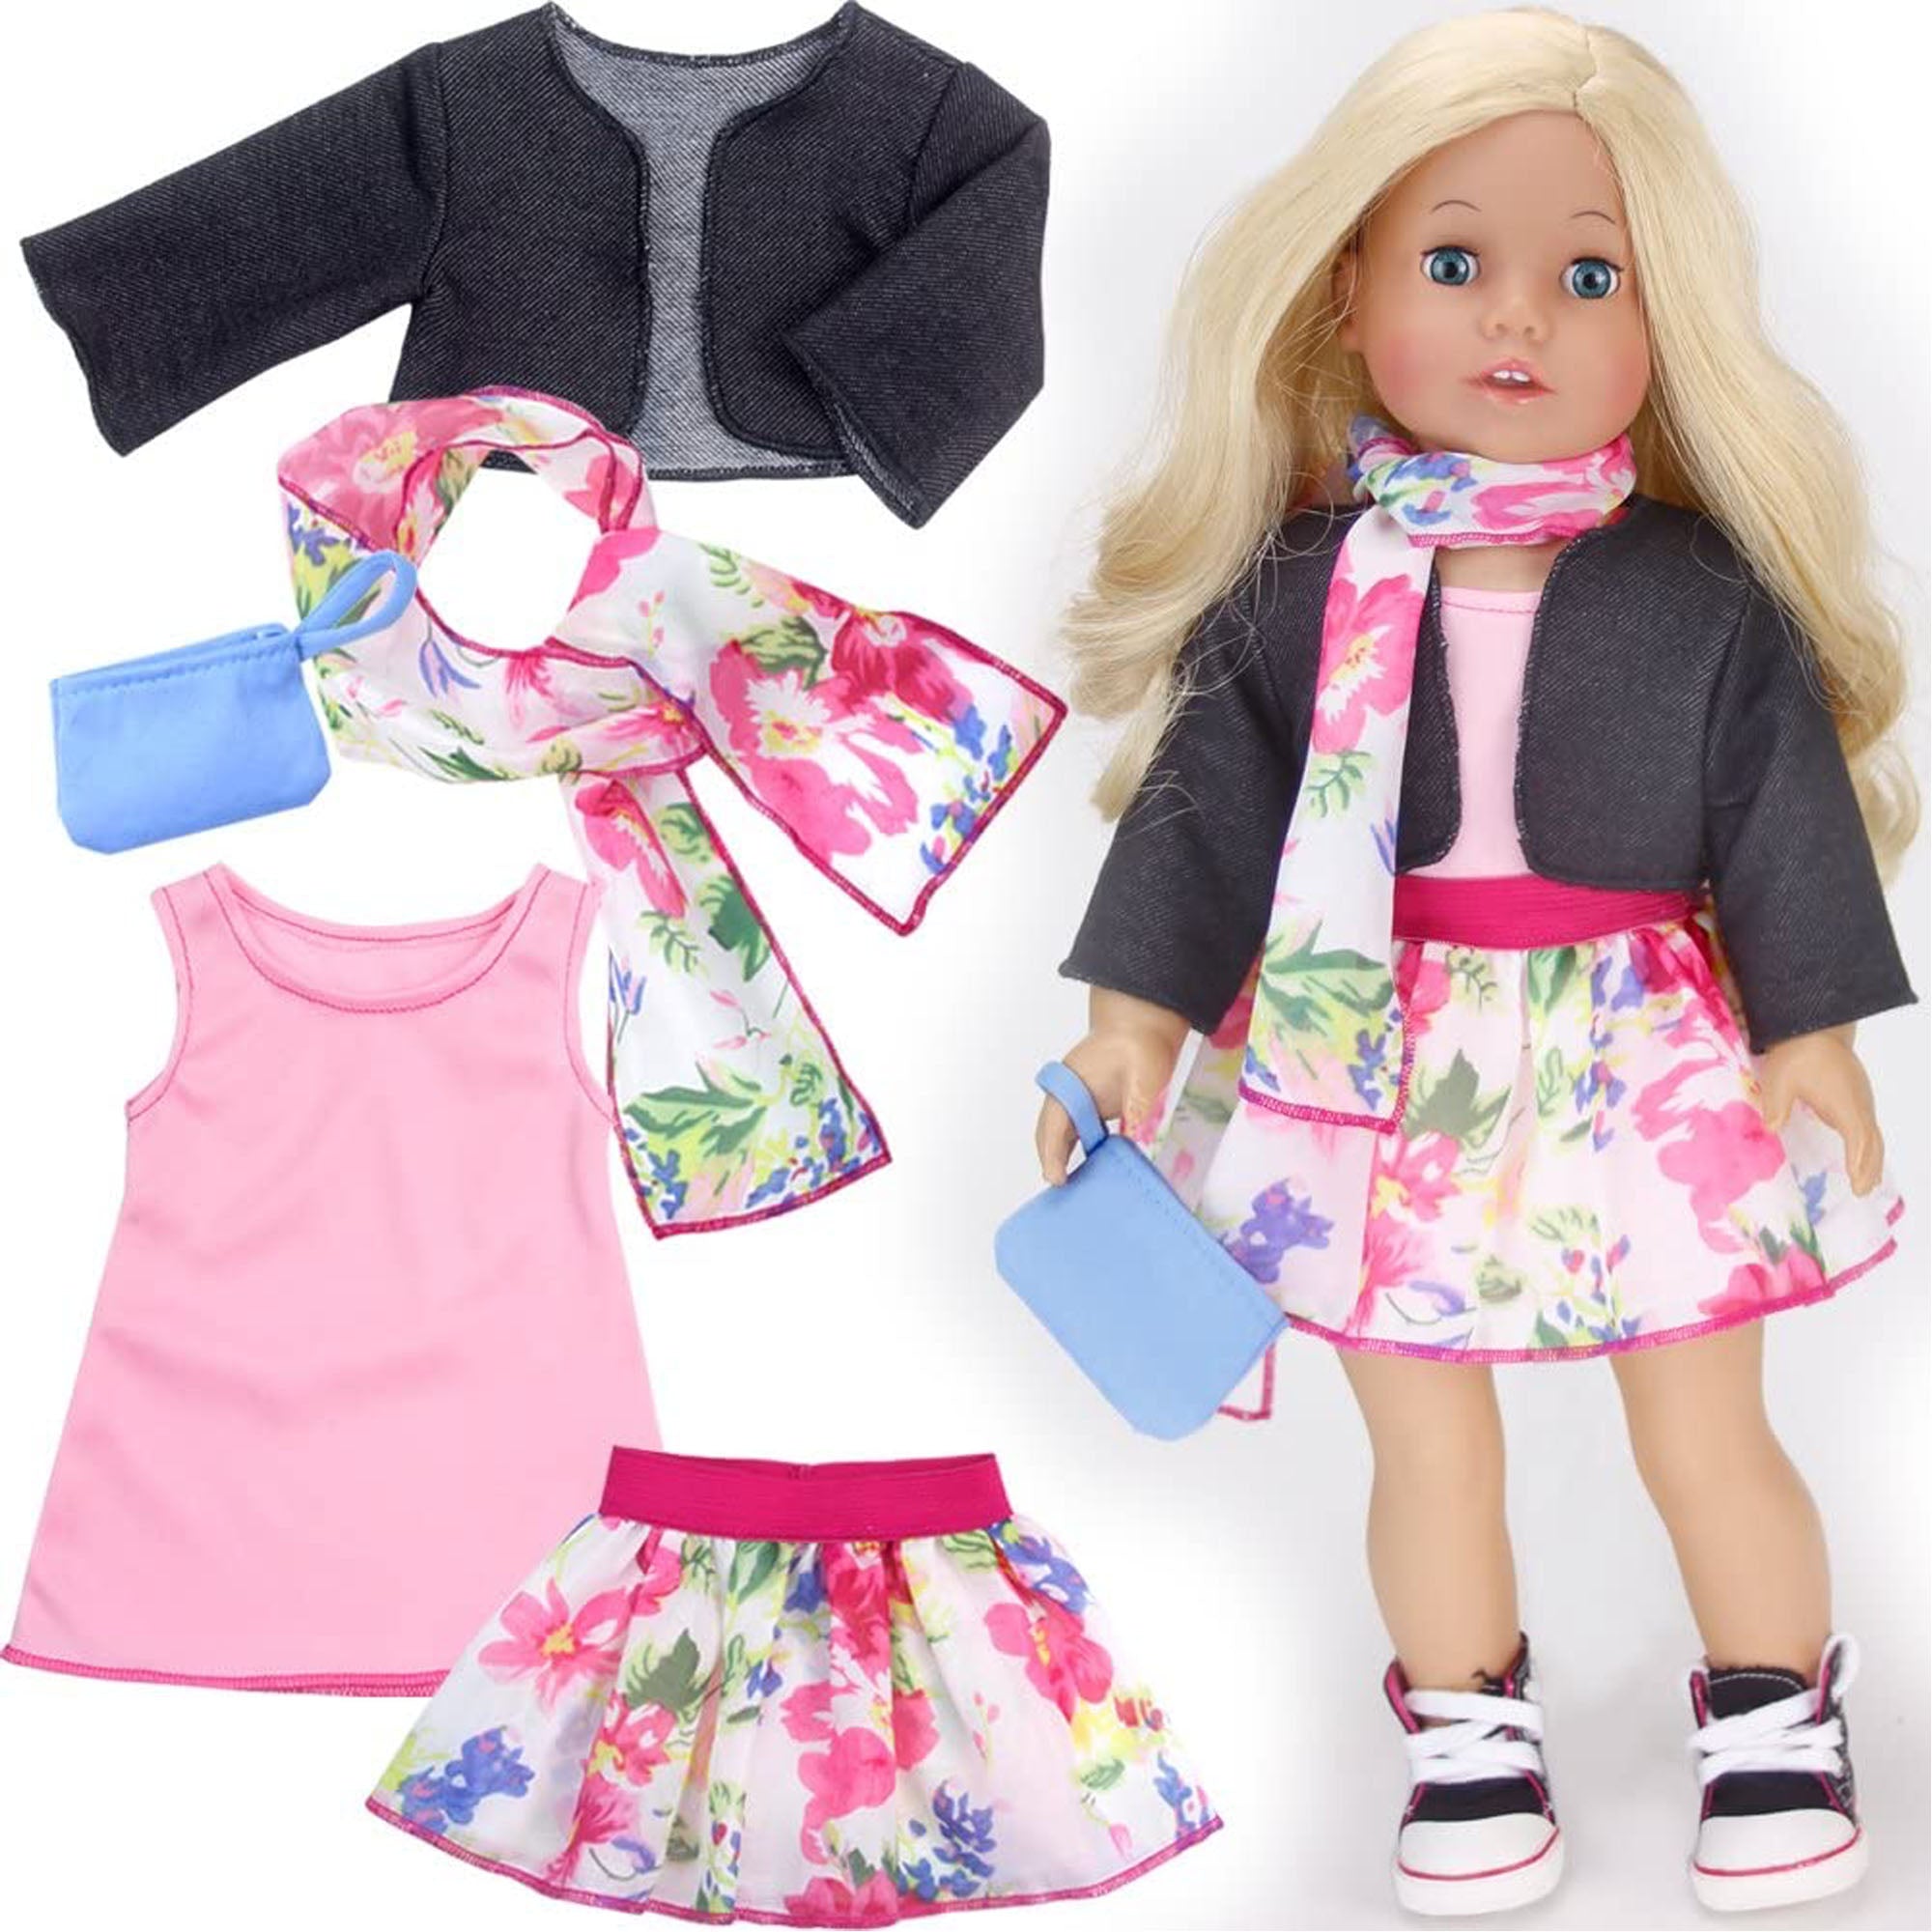 Sophia's 9 Piece Spring Wardrobe Mix and Match Set with Accessories for 18" Dolls, Pink/Blue